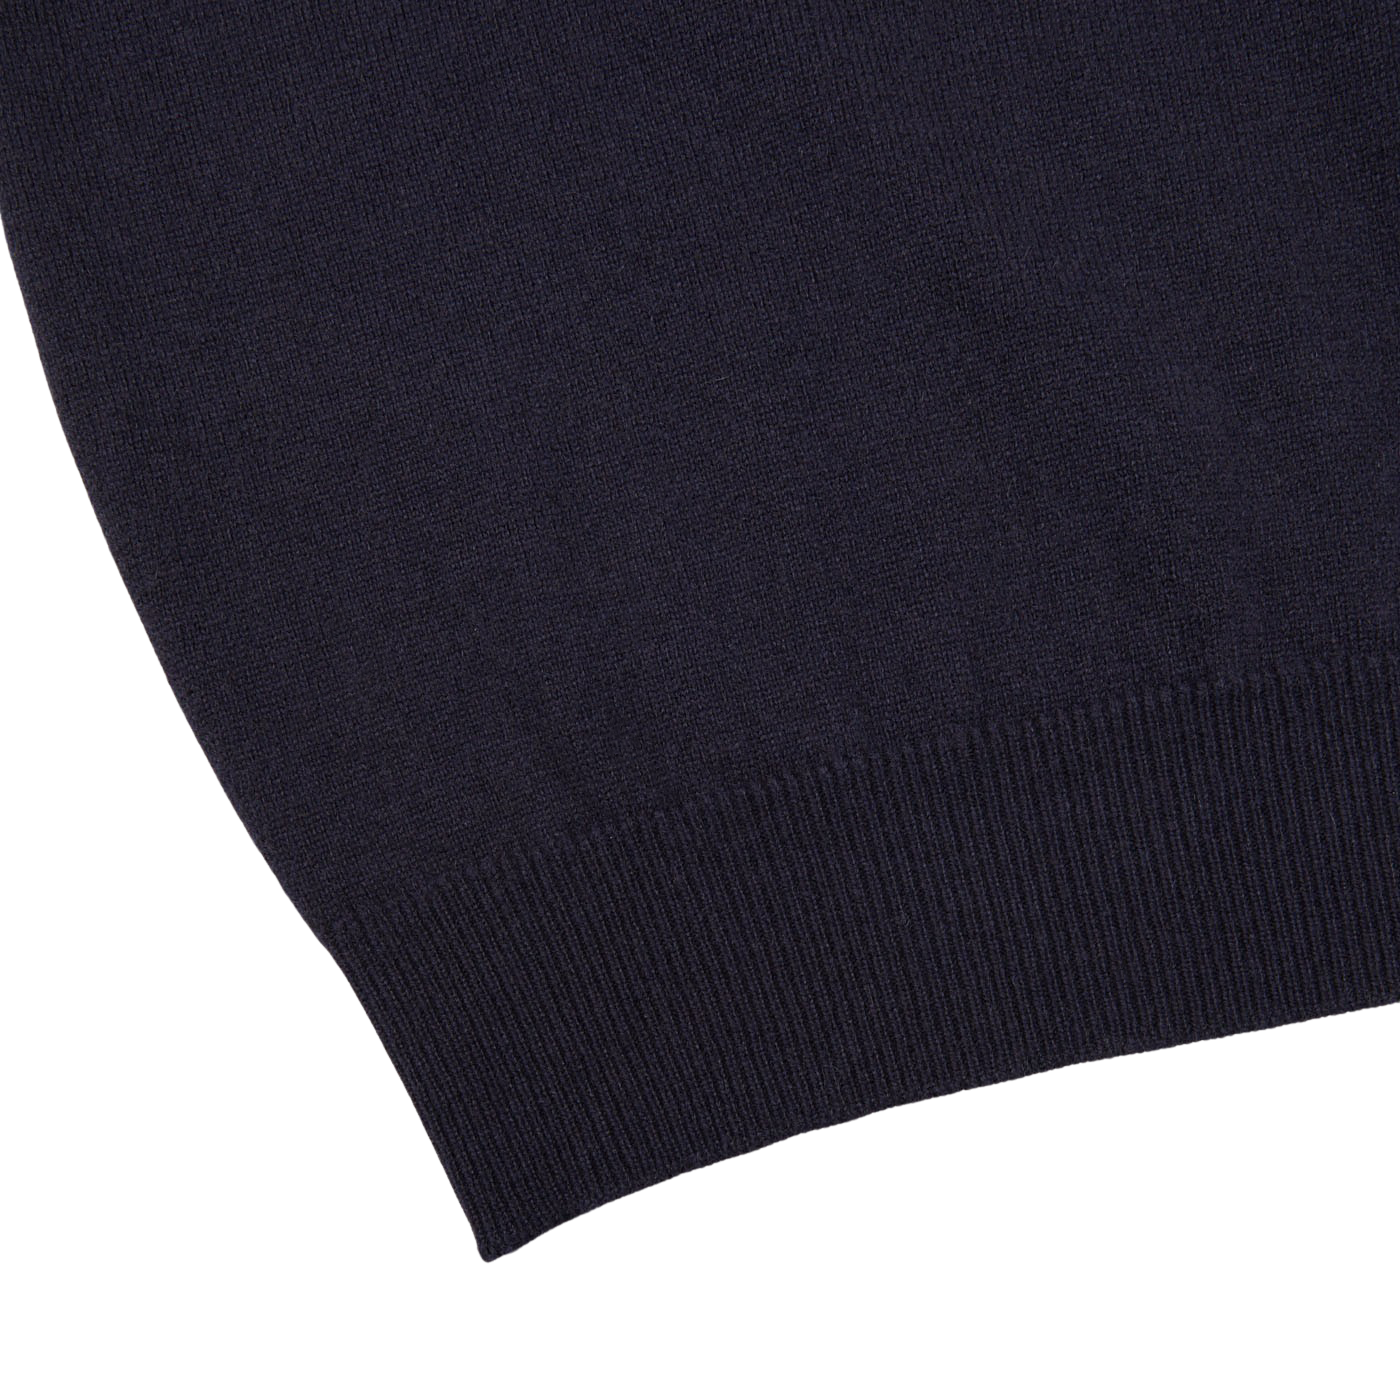 A close up of a William Lockie navy v-neck cashmere sweater with ribbed hems on a white surface.